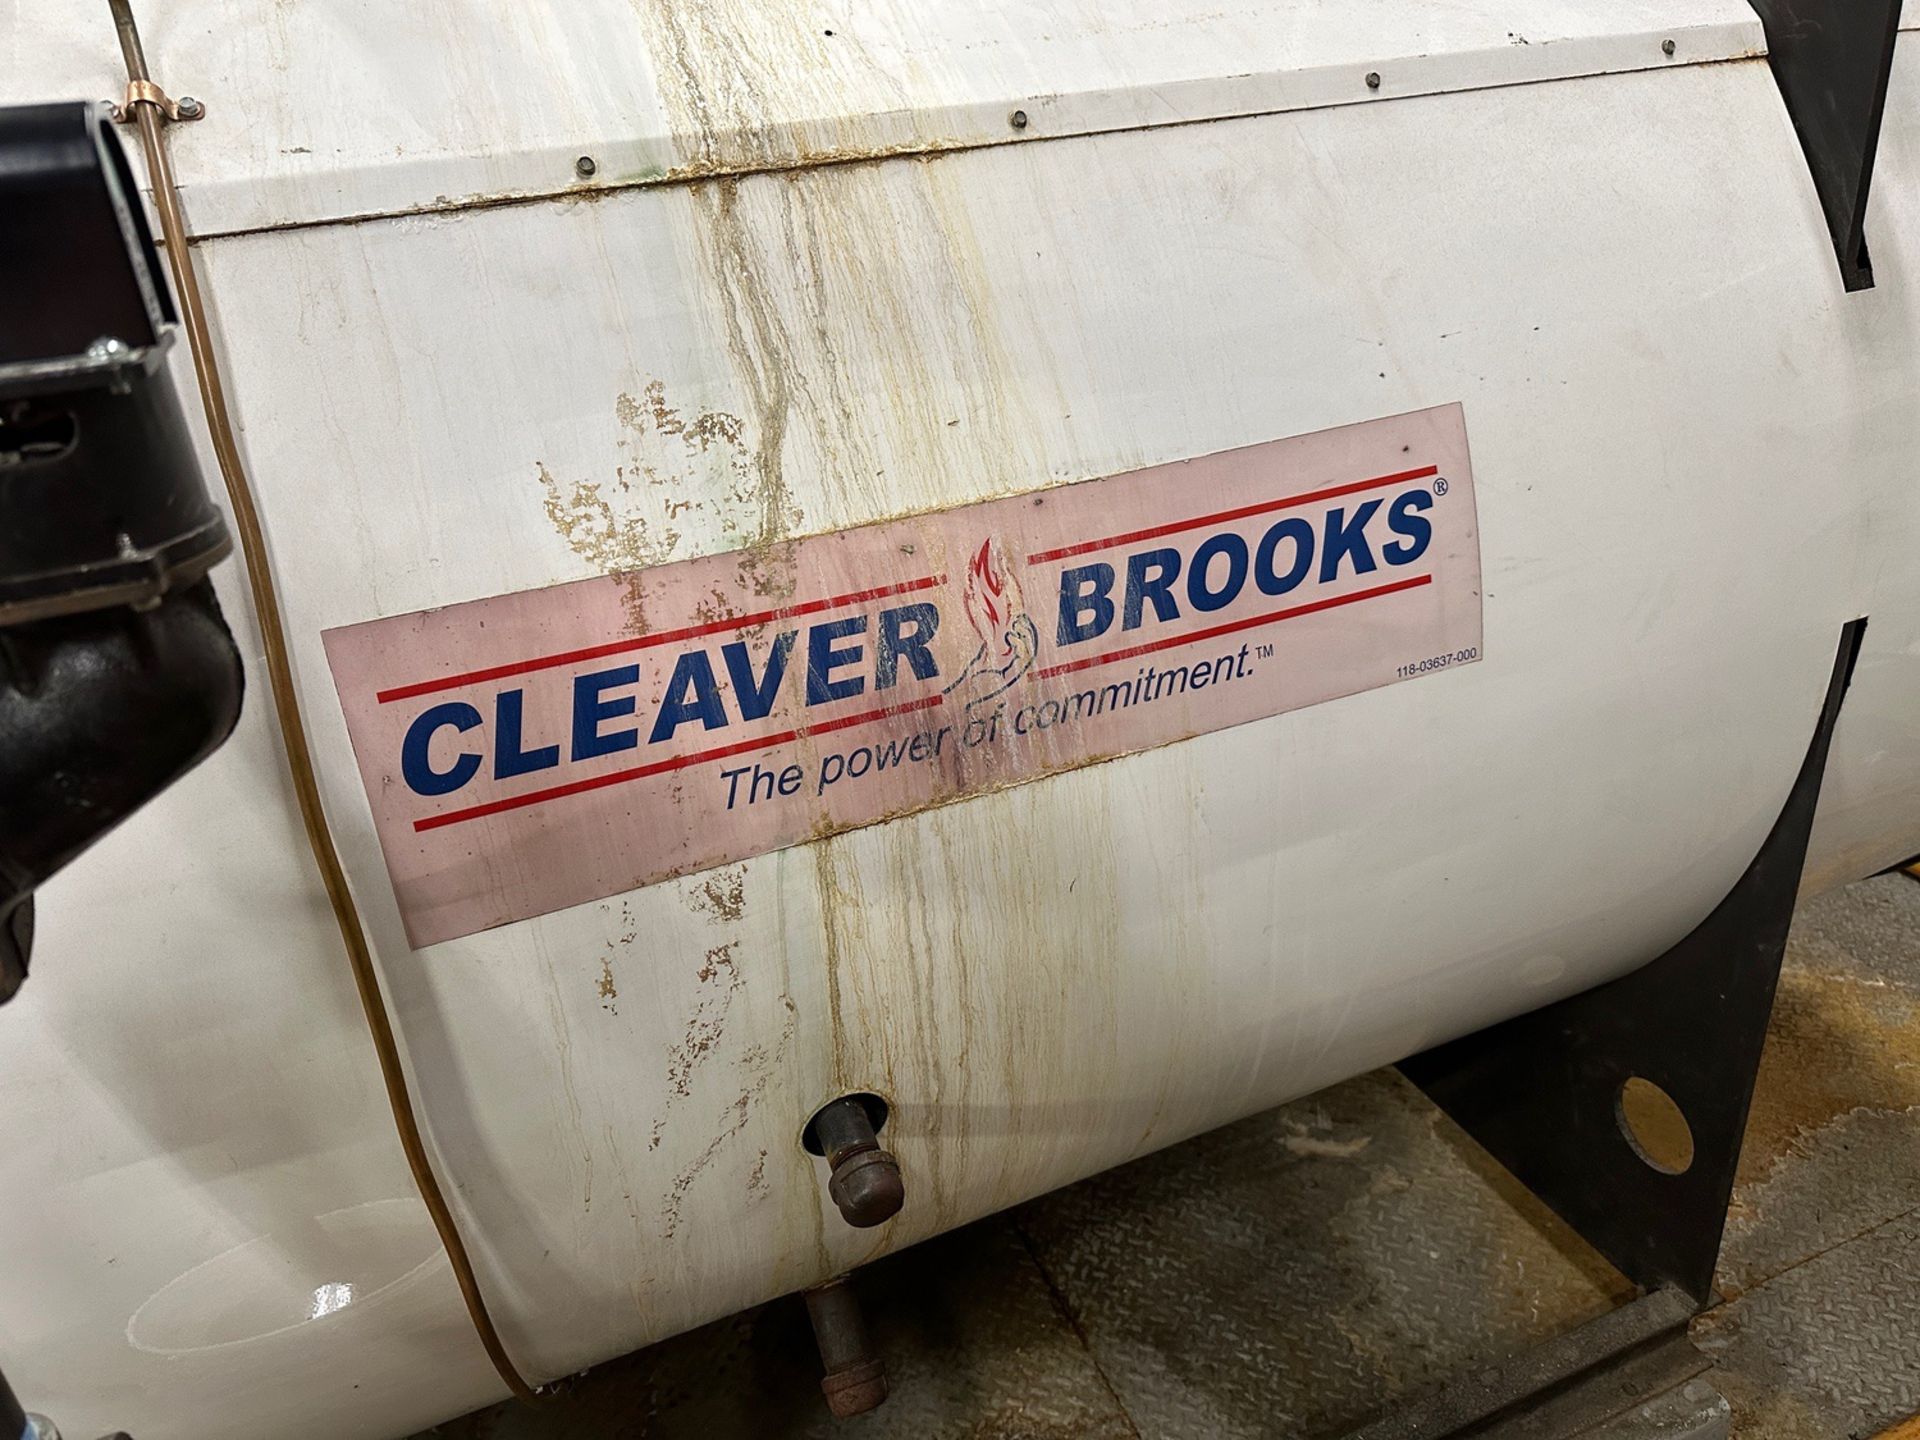 Cleaver Books Clear Fire Natural Gas Model CFH 700-50-15ST Low Pressure Steam Boile | Rig Fee $2400 - Image 3 of 6